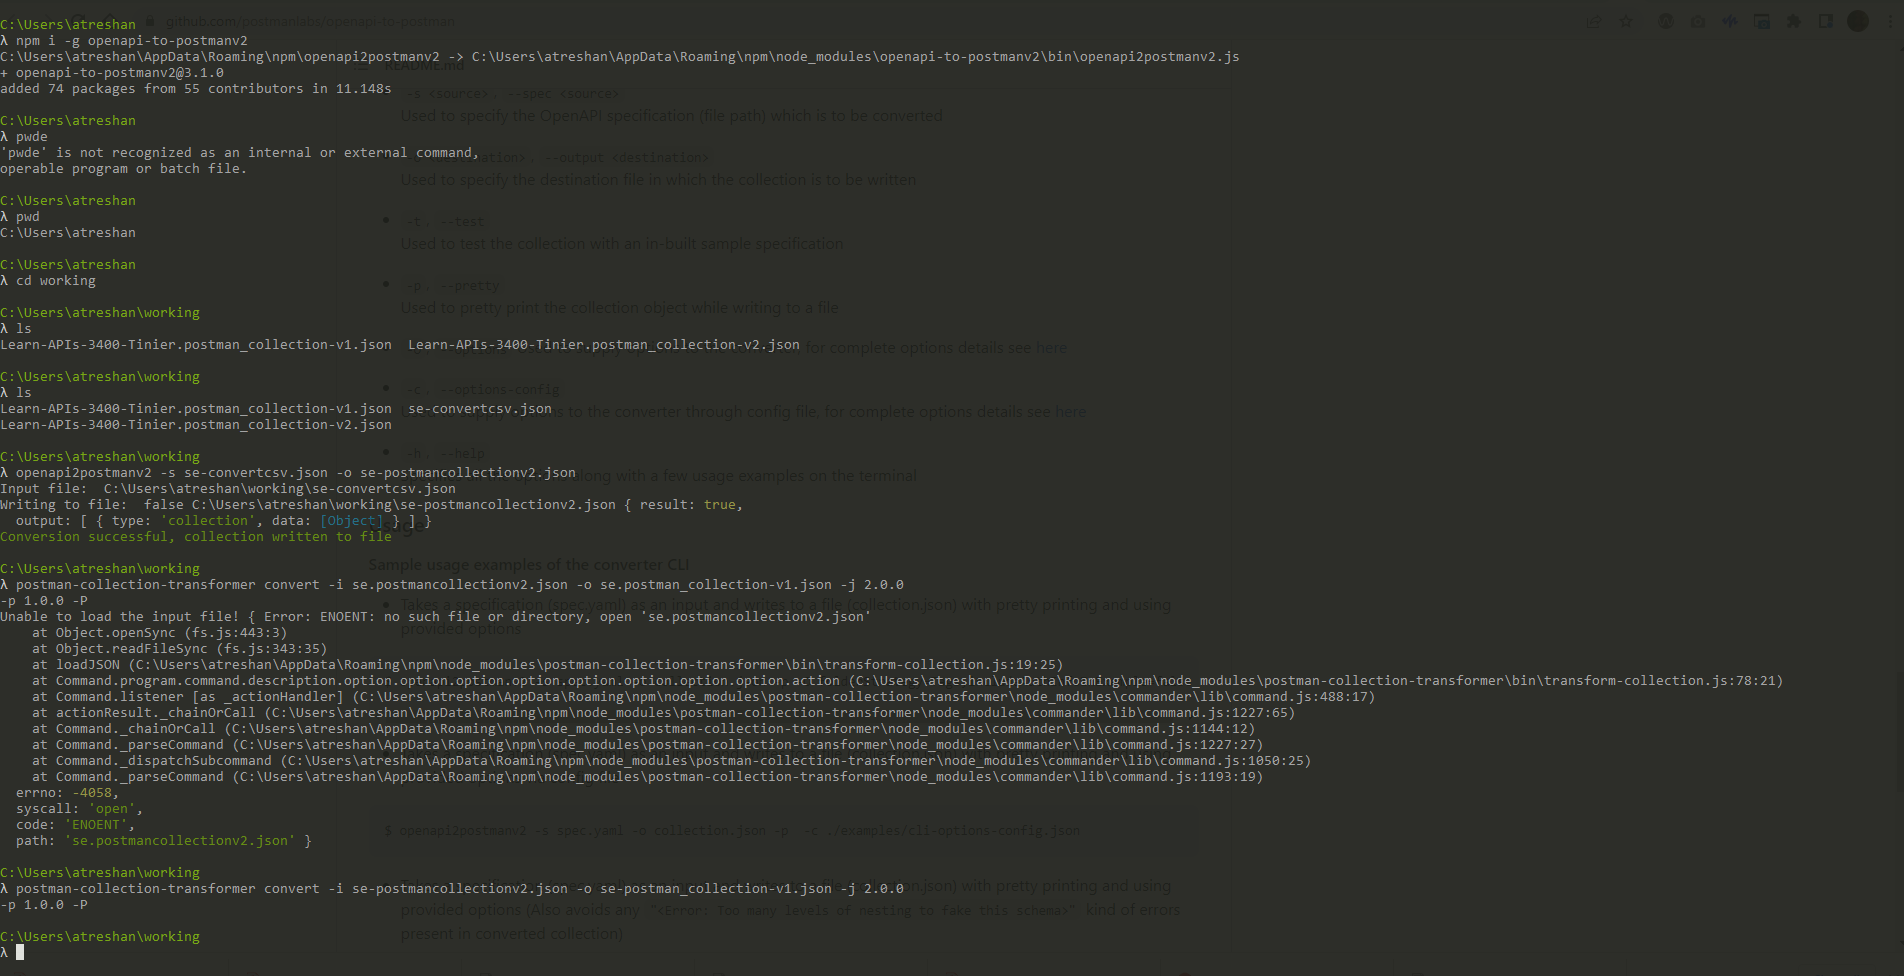 Screenshot of the api to postman converter in the command line